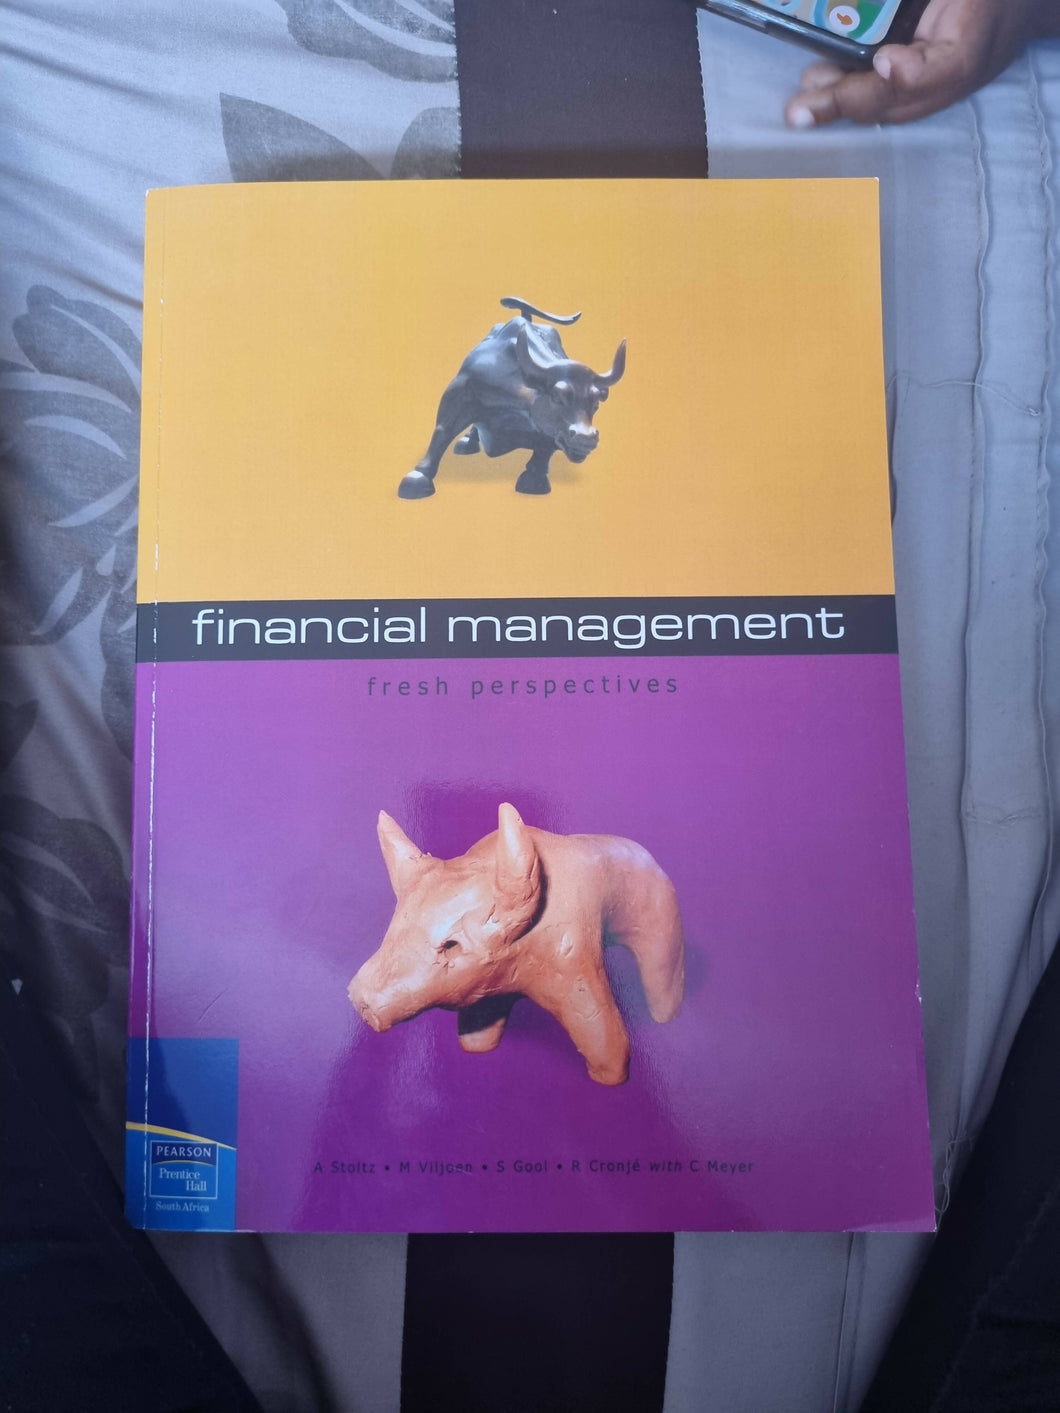 Financial management: Fresh perspectives